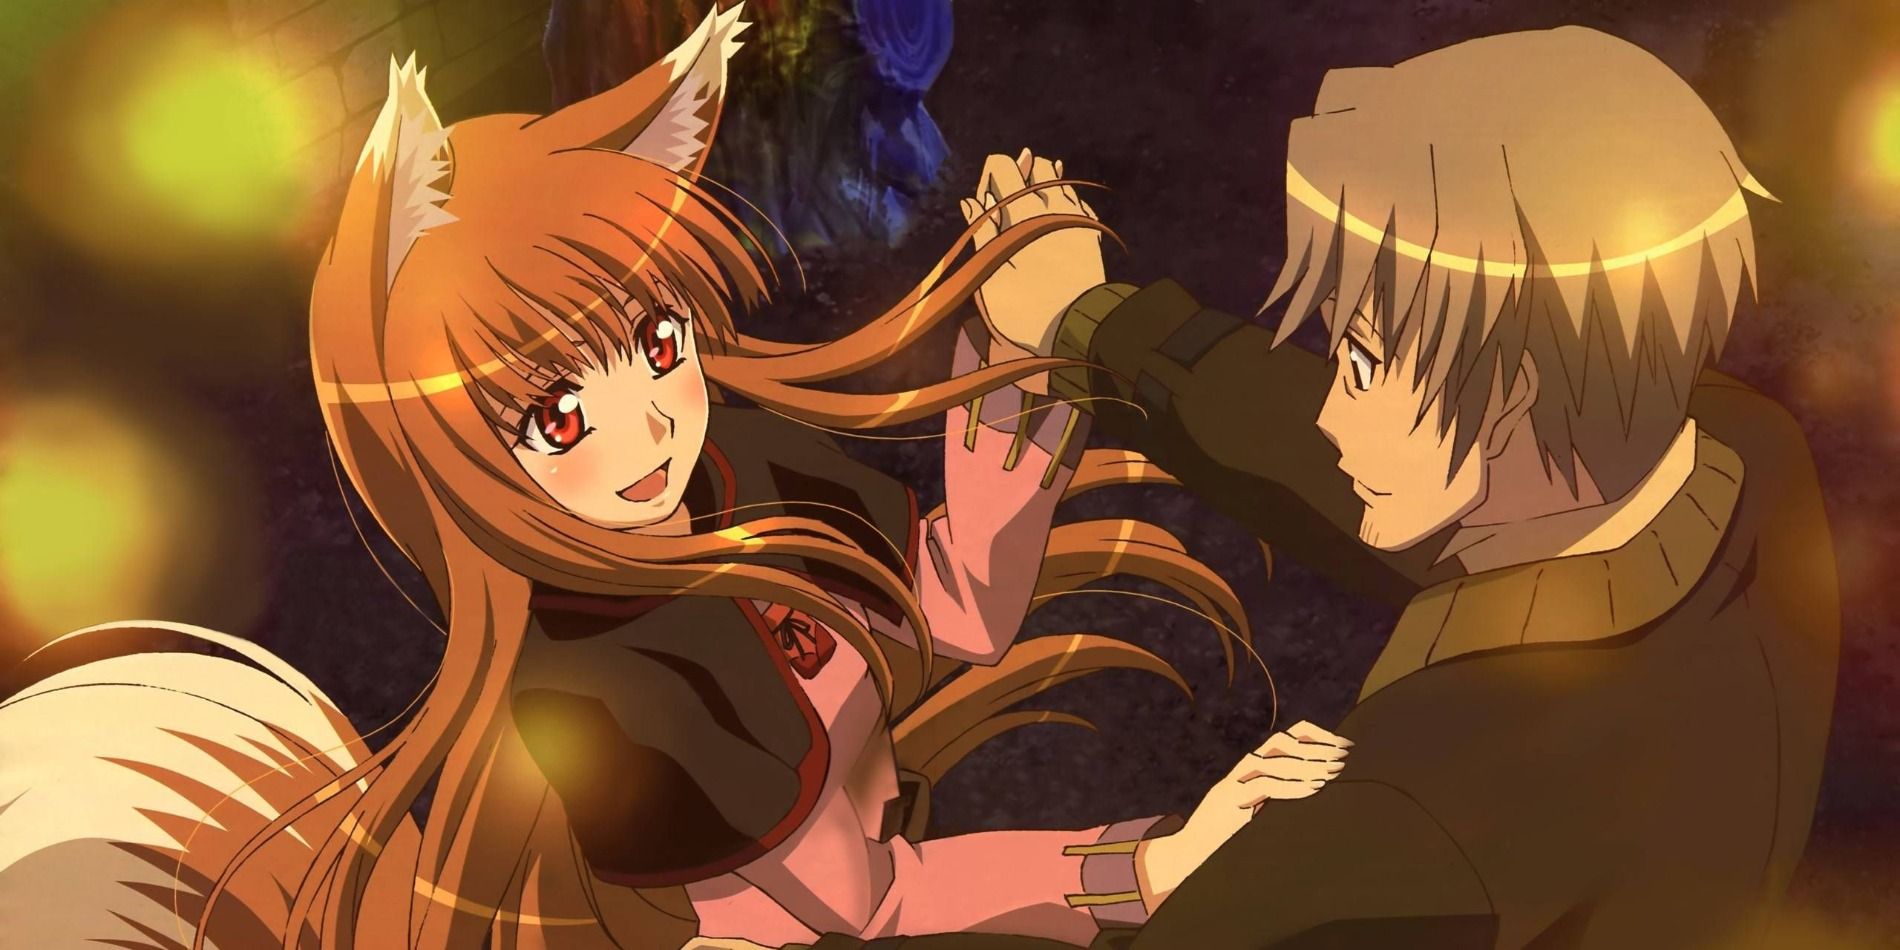 Spice and Wolf Returns With New Anime